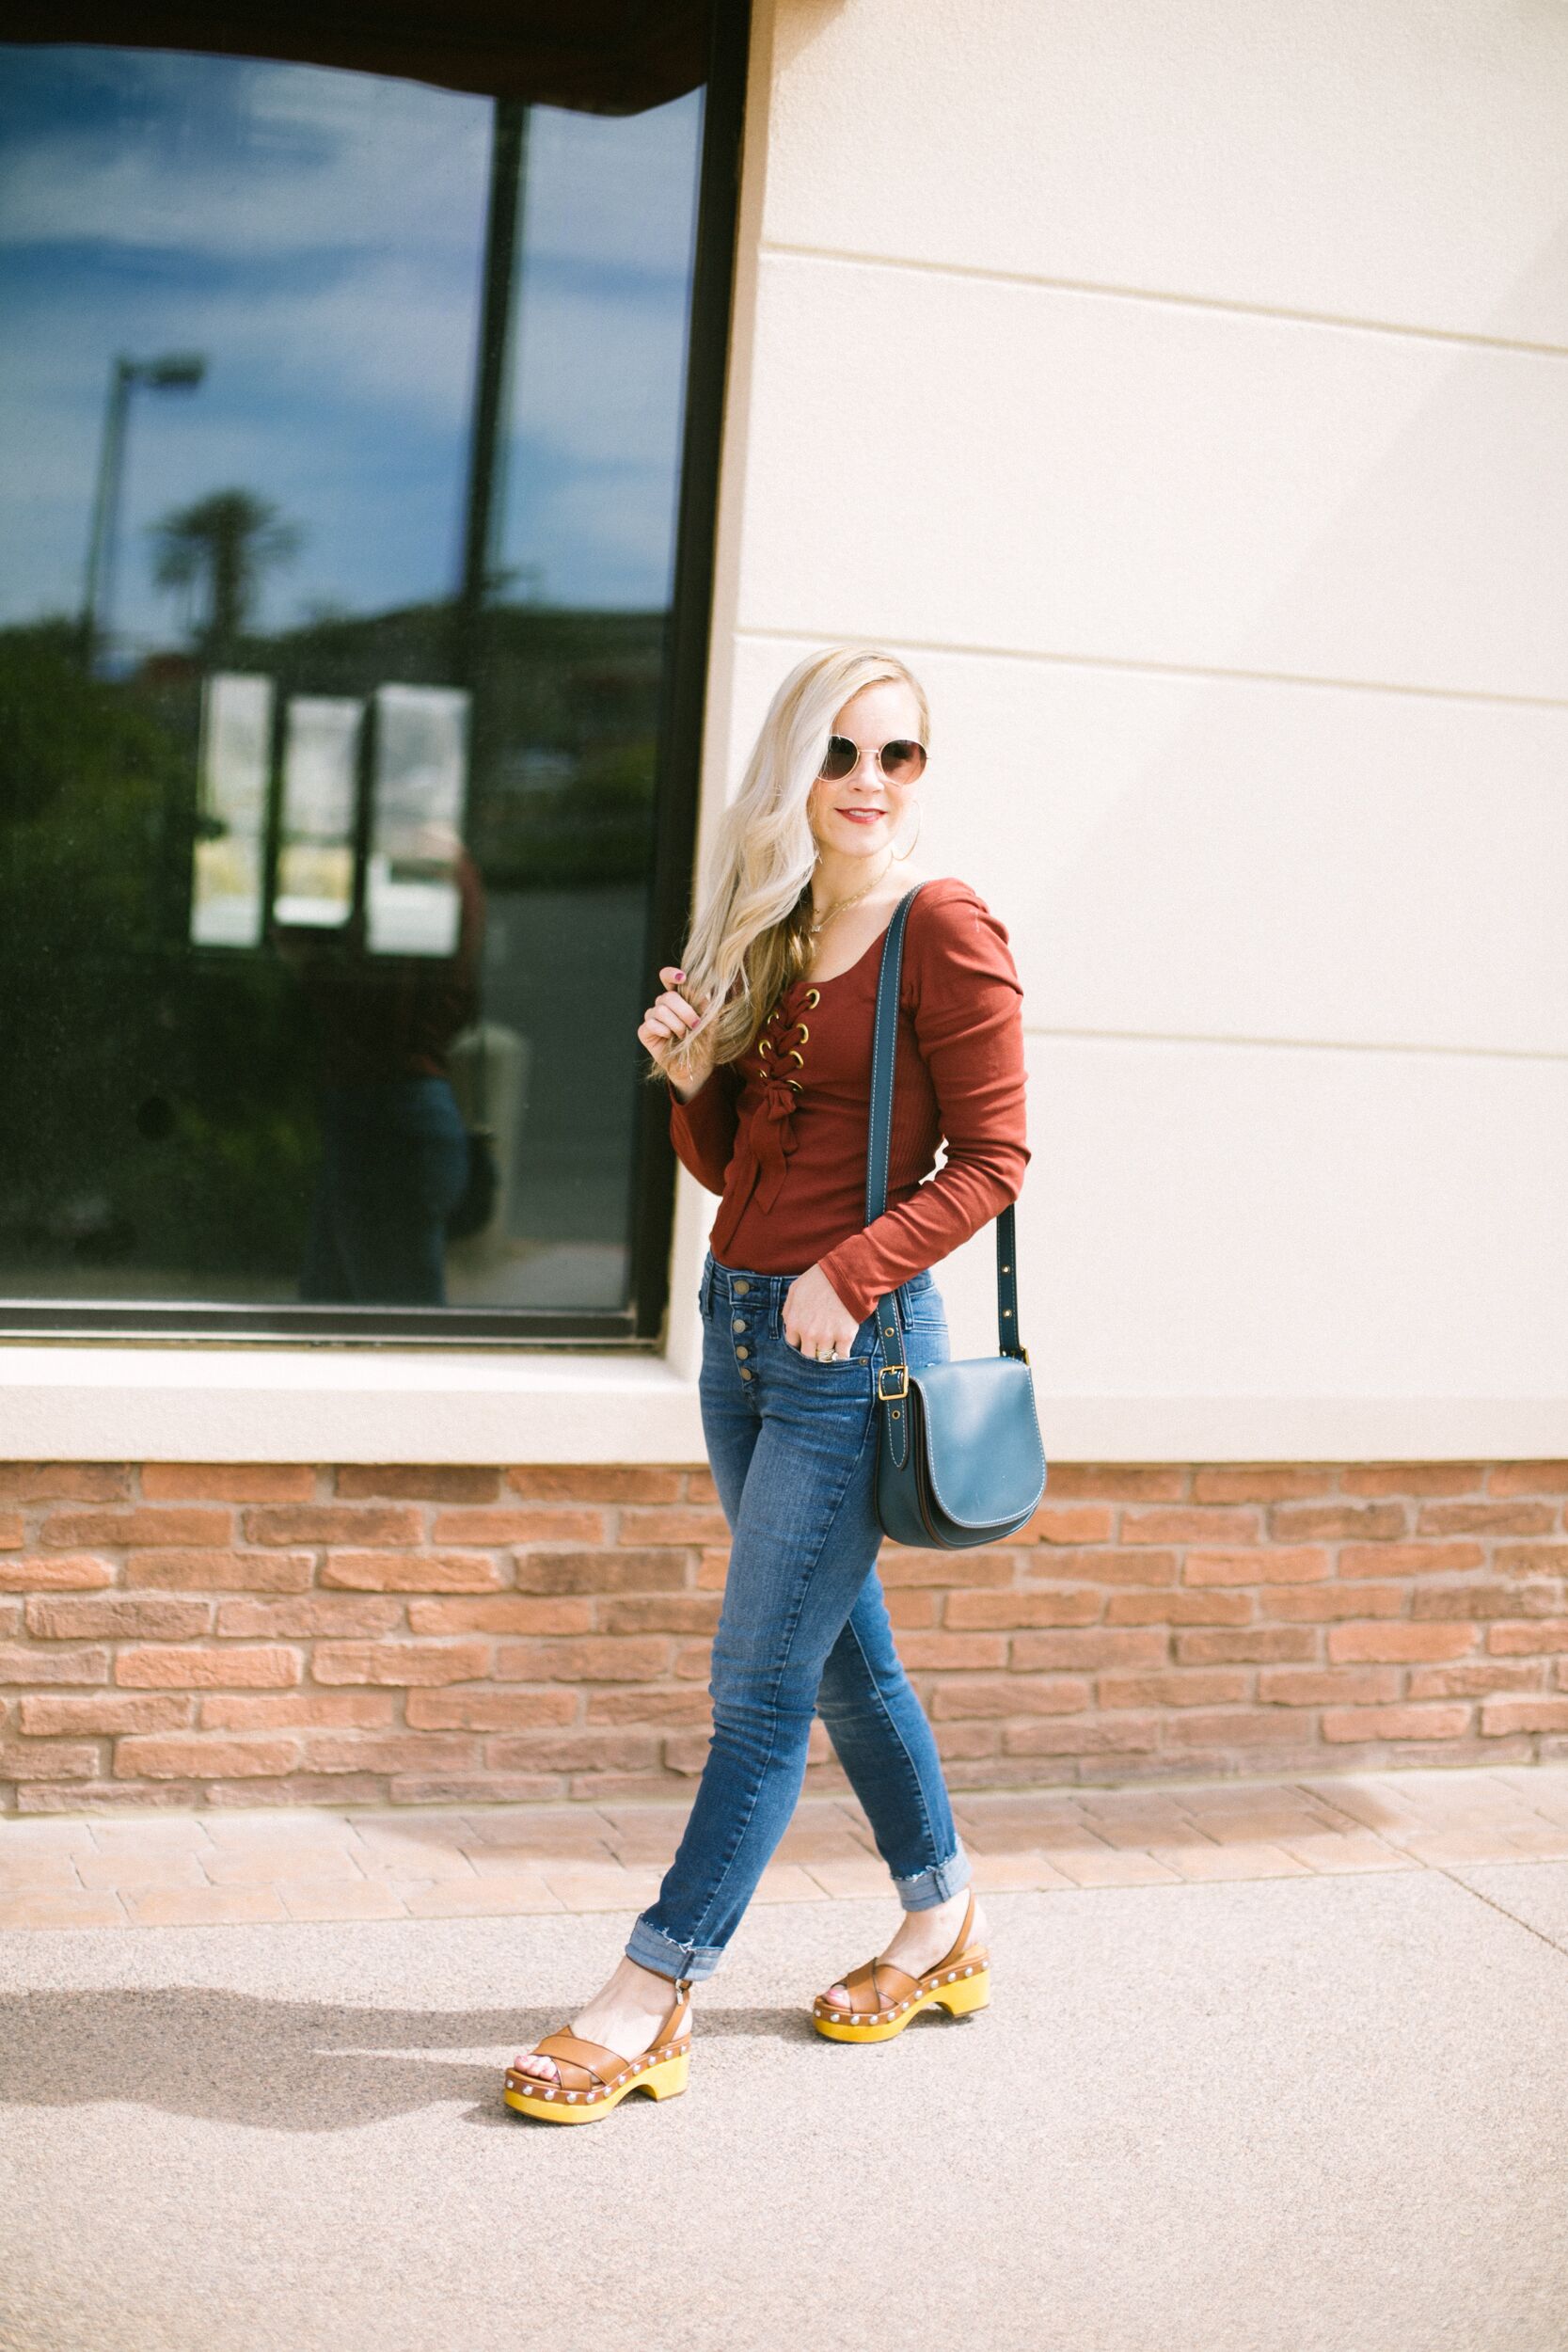 How to Find the Perfect Pair of Jeans by popular Las Vegas fashion bloggers Life of a Sister